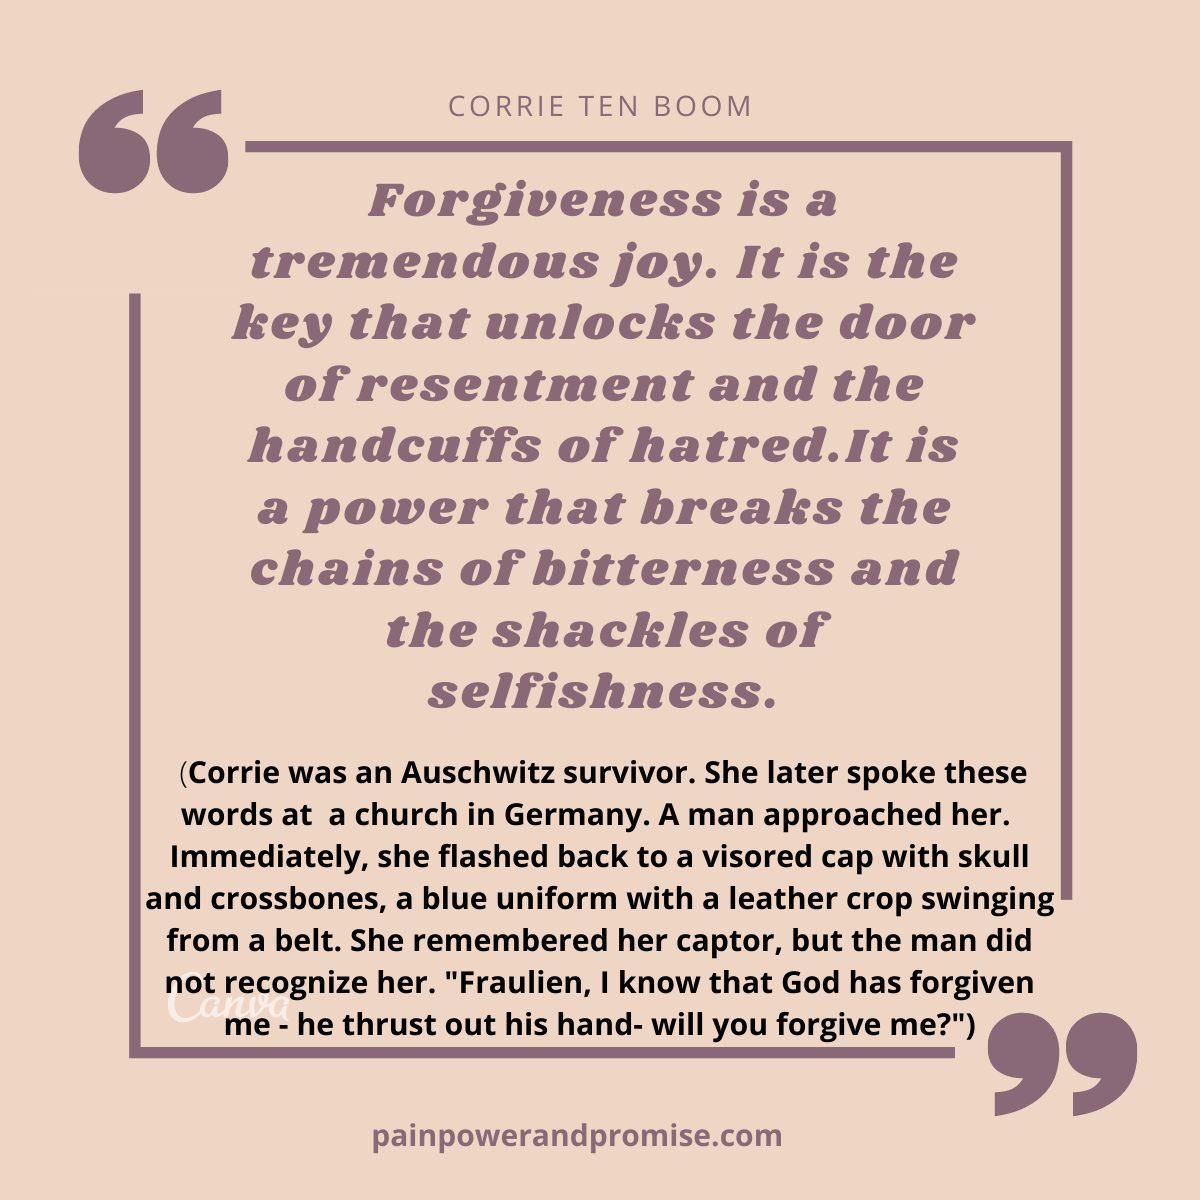 Forgiveness is a tremendous joy. It is the key that unlocks the door of resentment and hte handcuffs of hatred. It is a power that breaks the chains of bitterness and the shackles of selfishness.